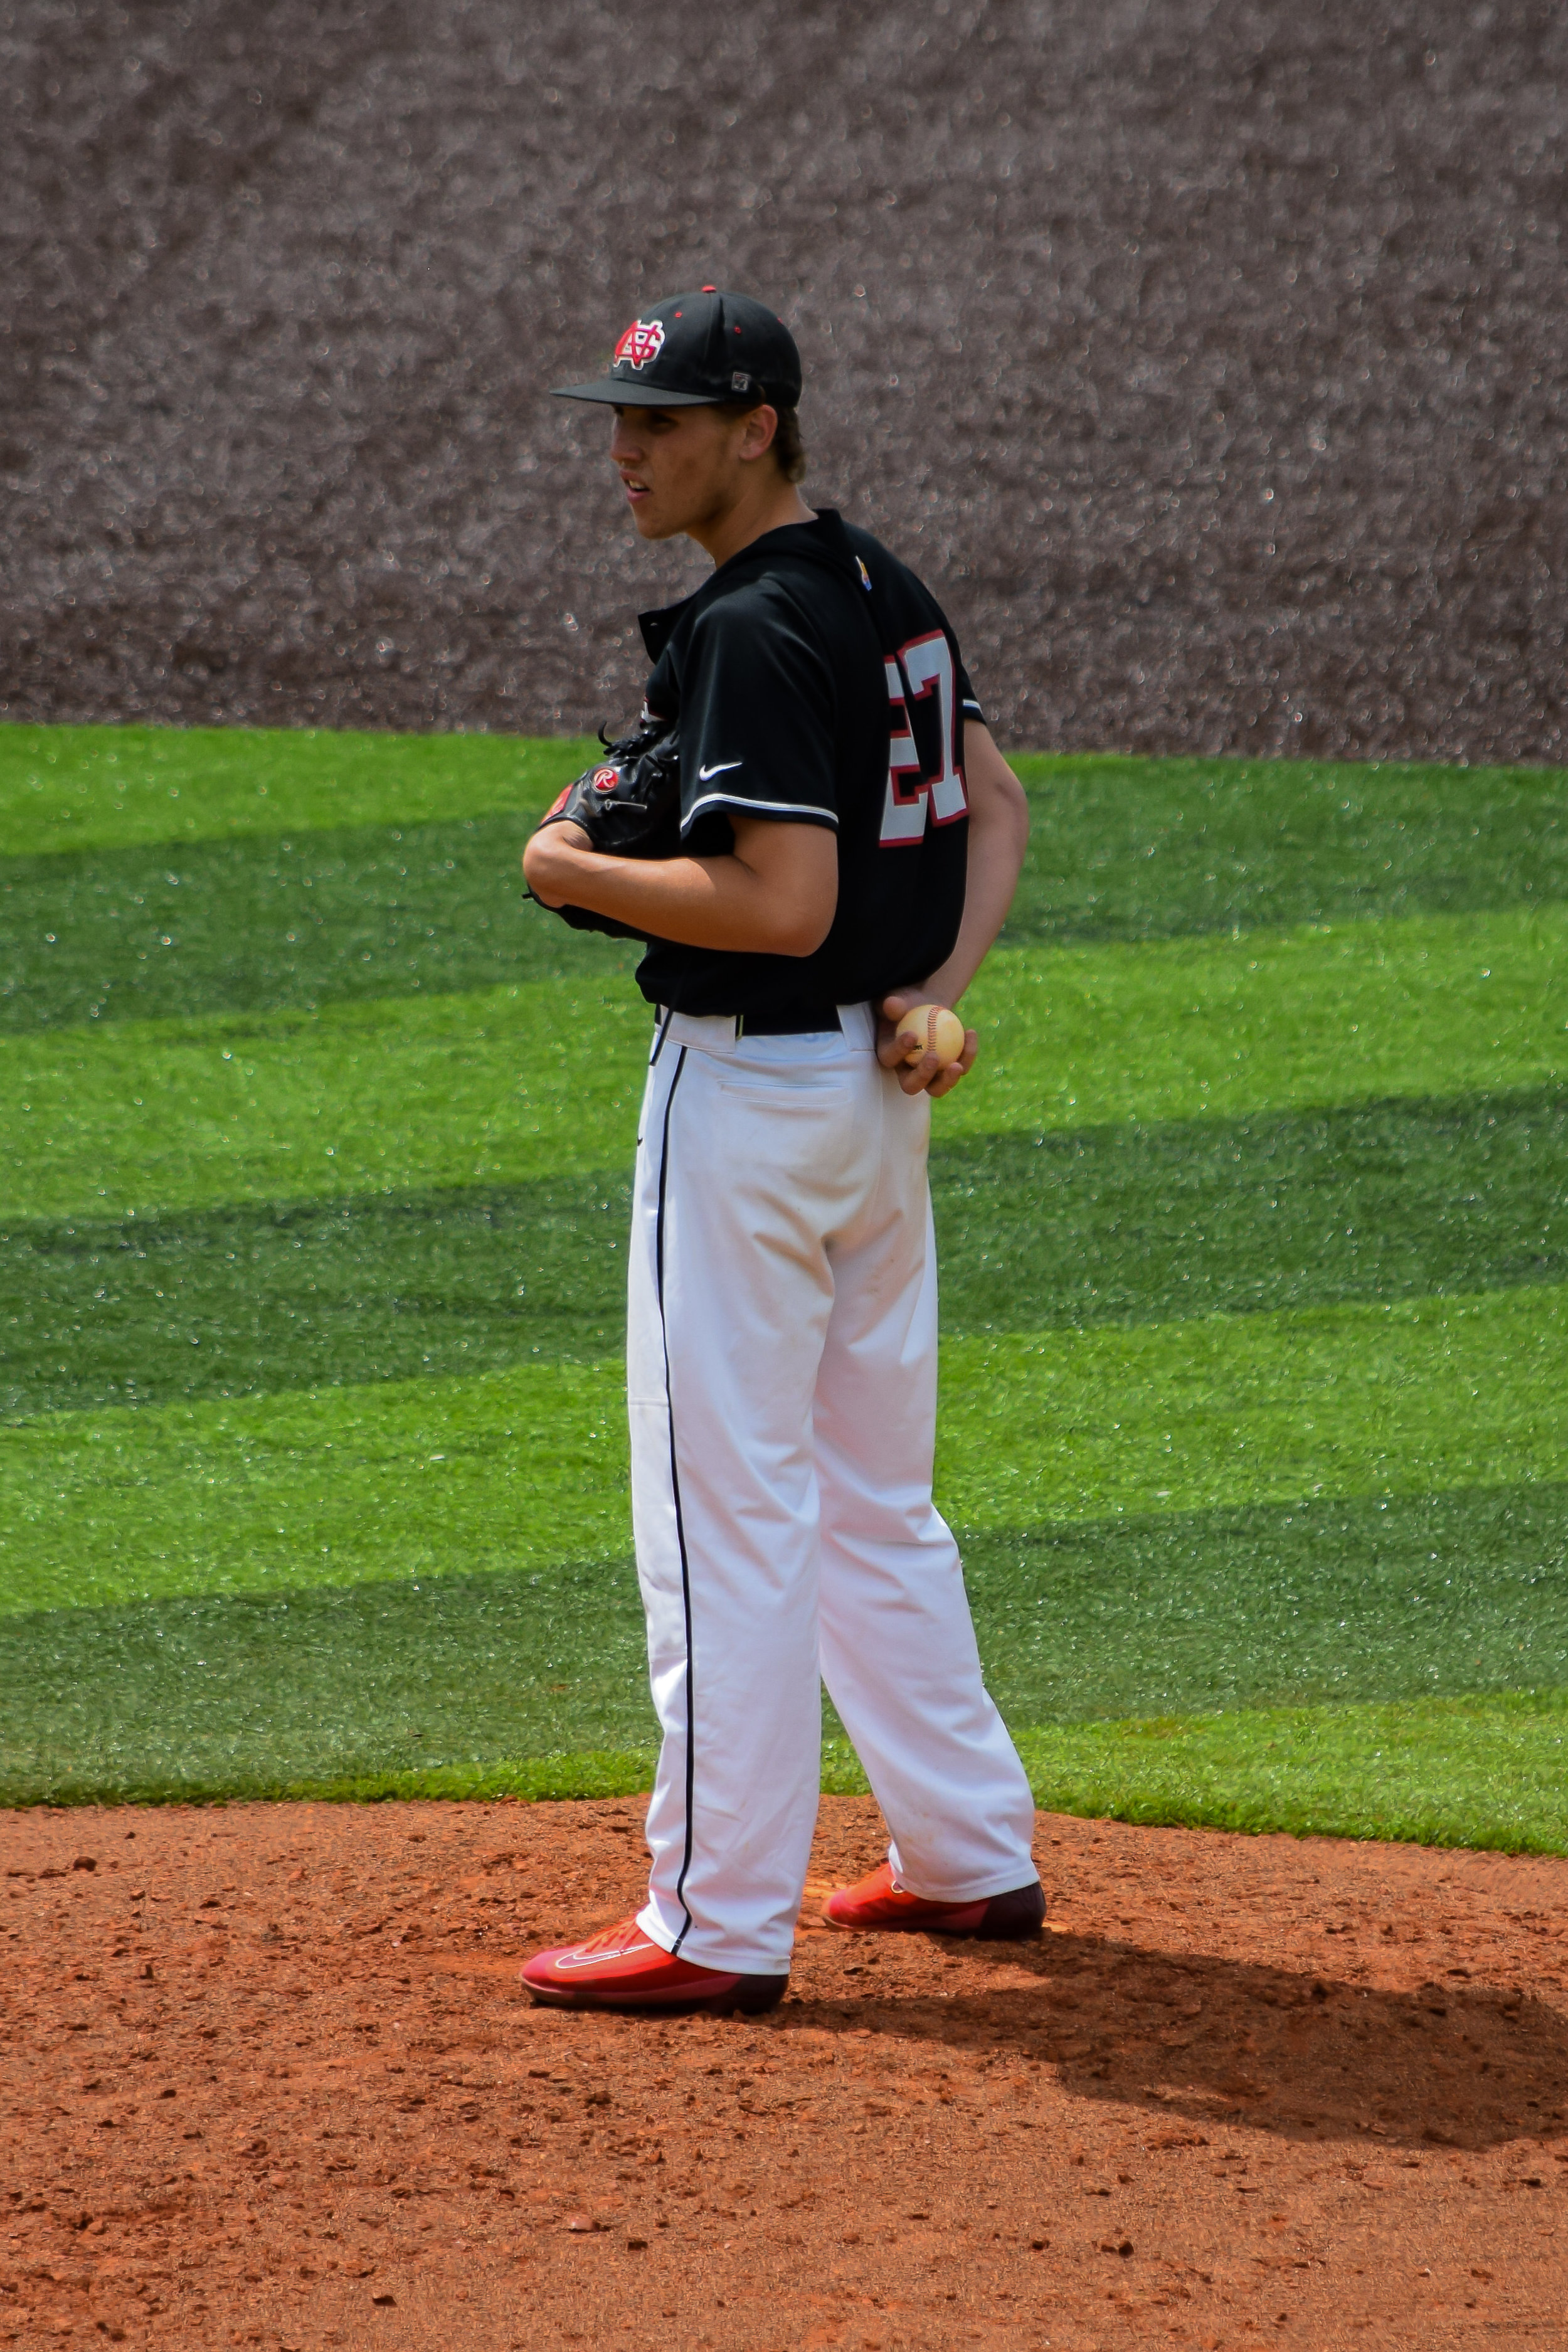 Ethan Garner focuses in as he gets ready to pitch.